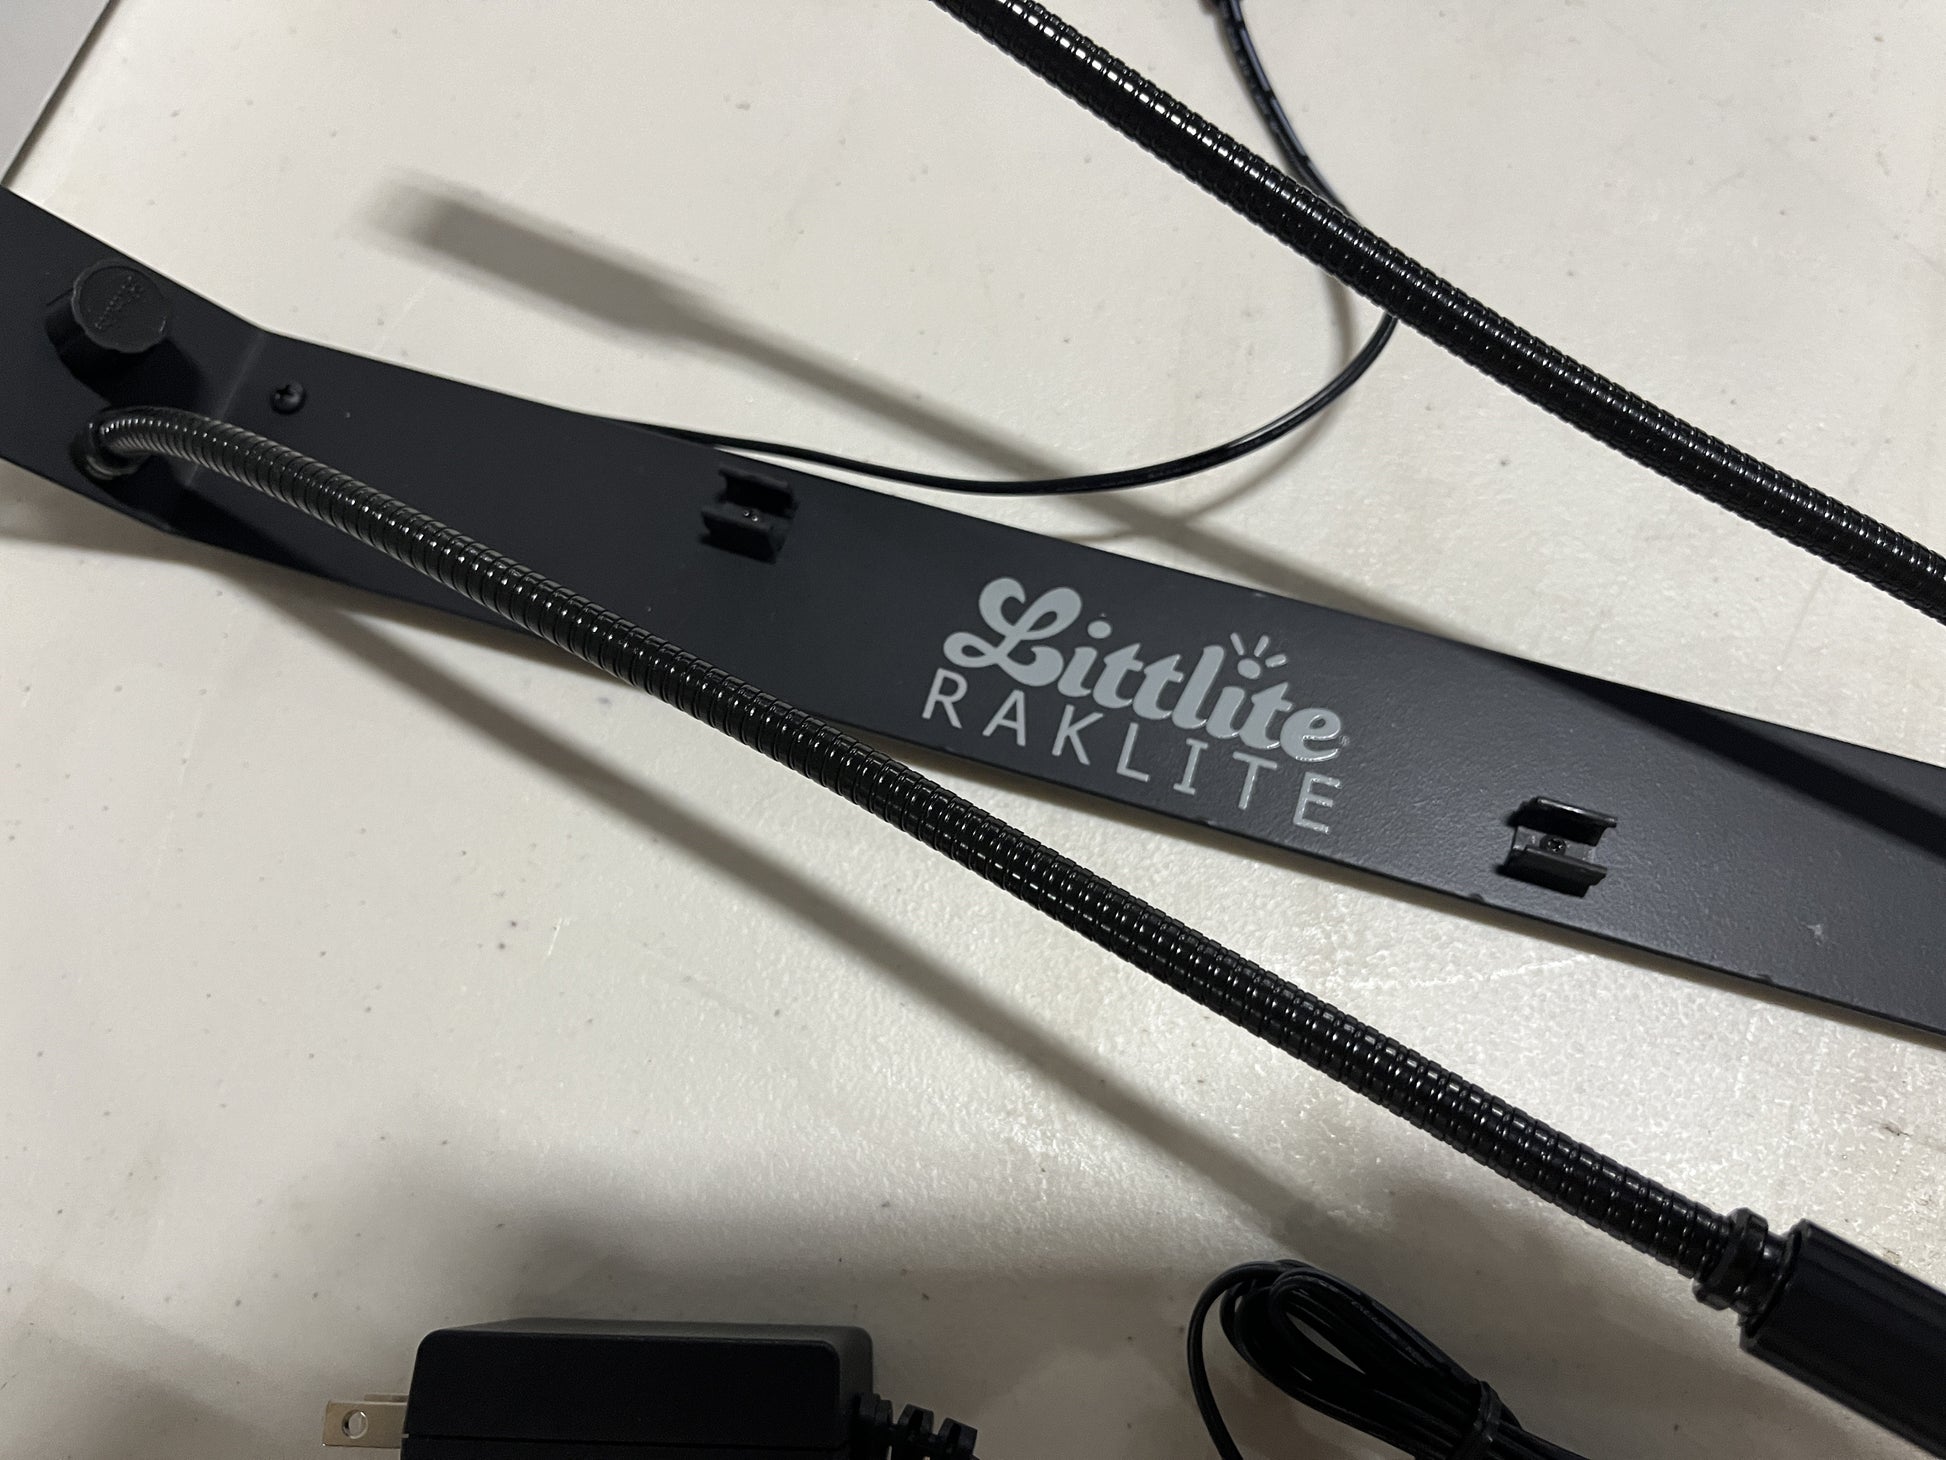 New Littlite Raklite Double LED Light, RL-10-D-LED, New In Box for Sale. We Sell Professional Audio Equipment. Audio Systems, Amplifiers, Consoles, Mixers, Electronics, Entertainment, Sound, Live.